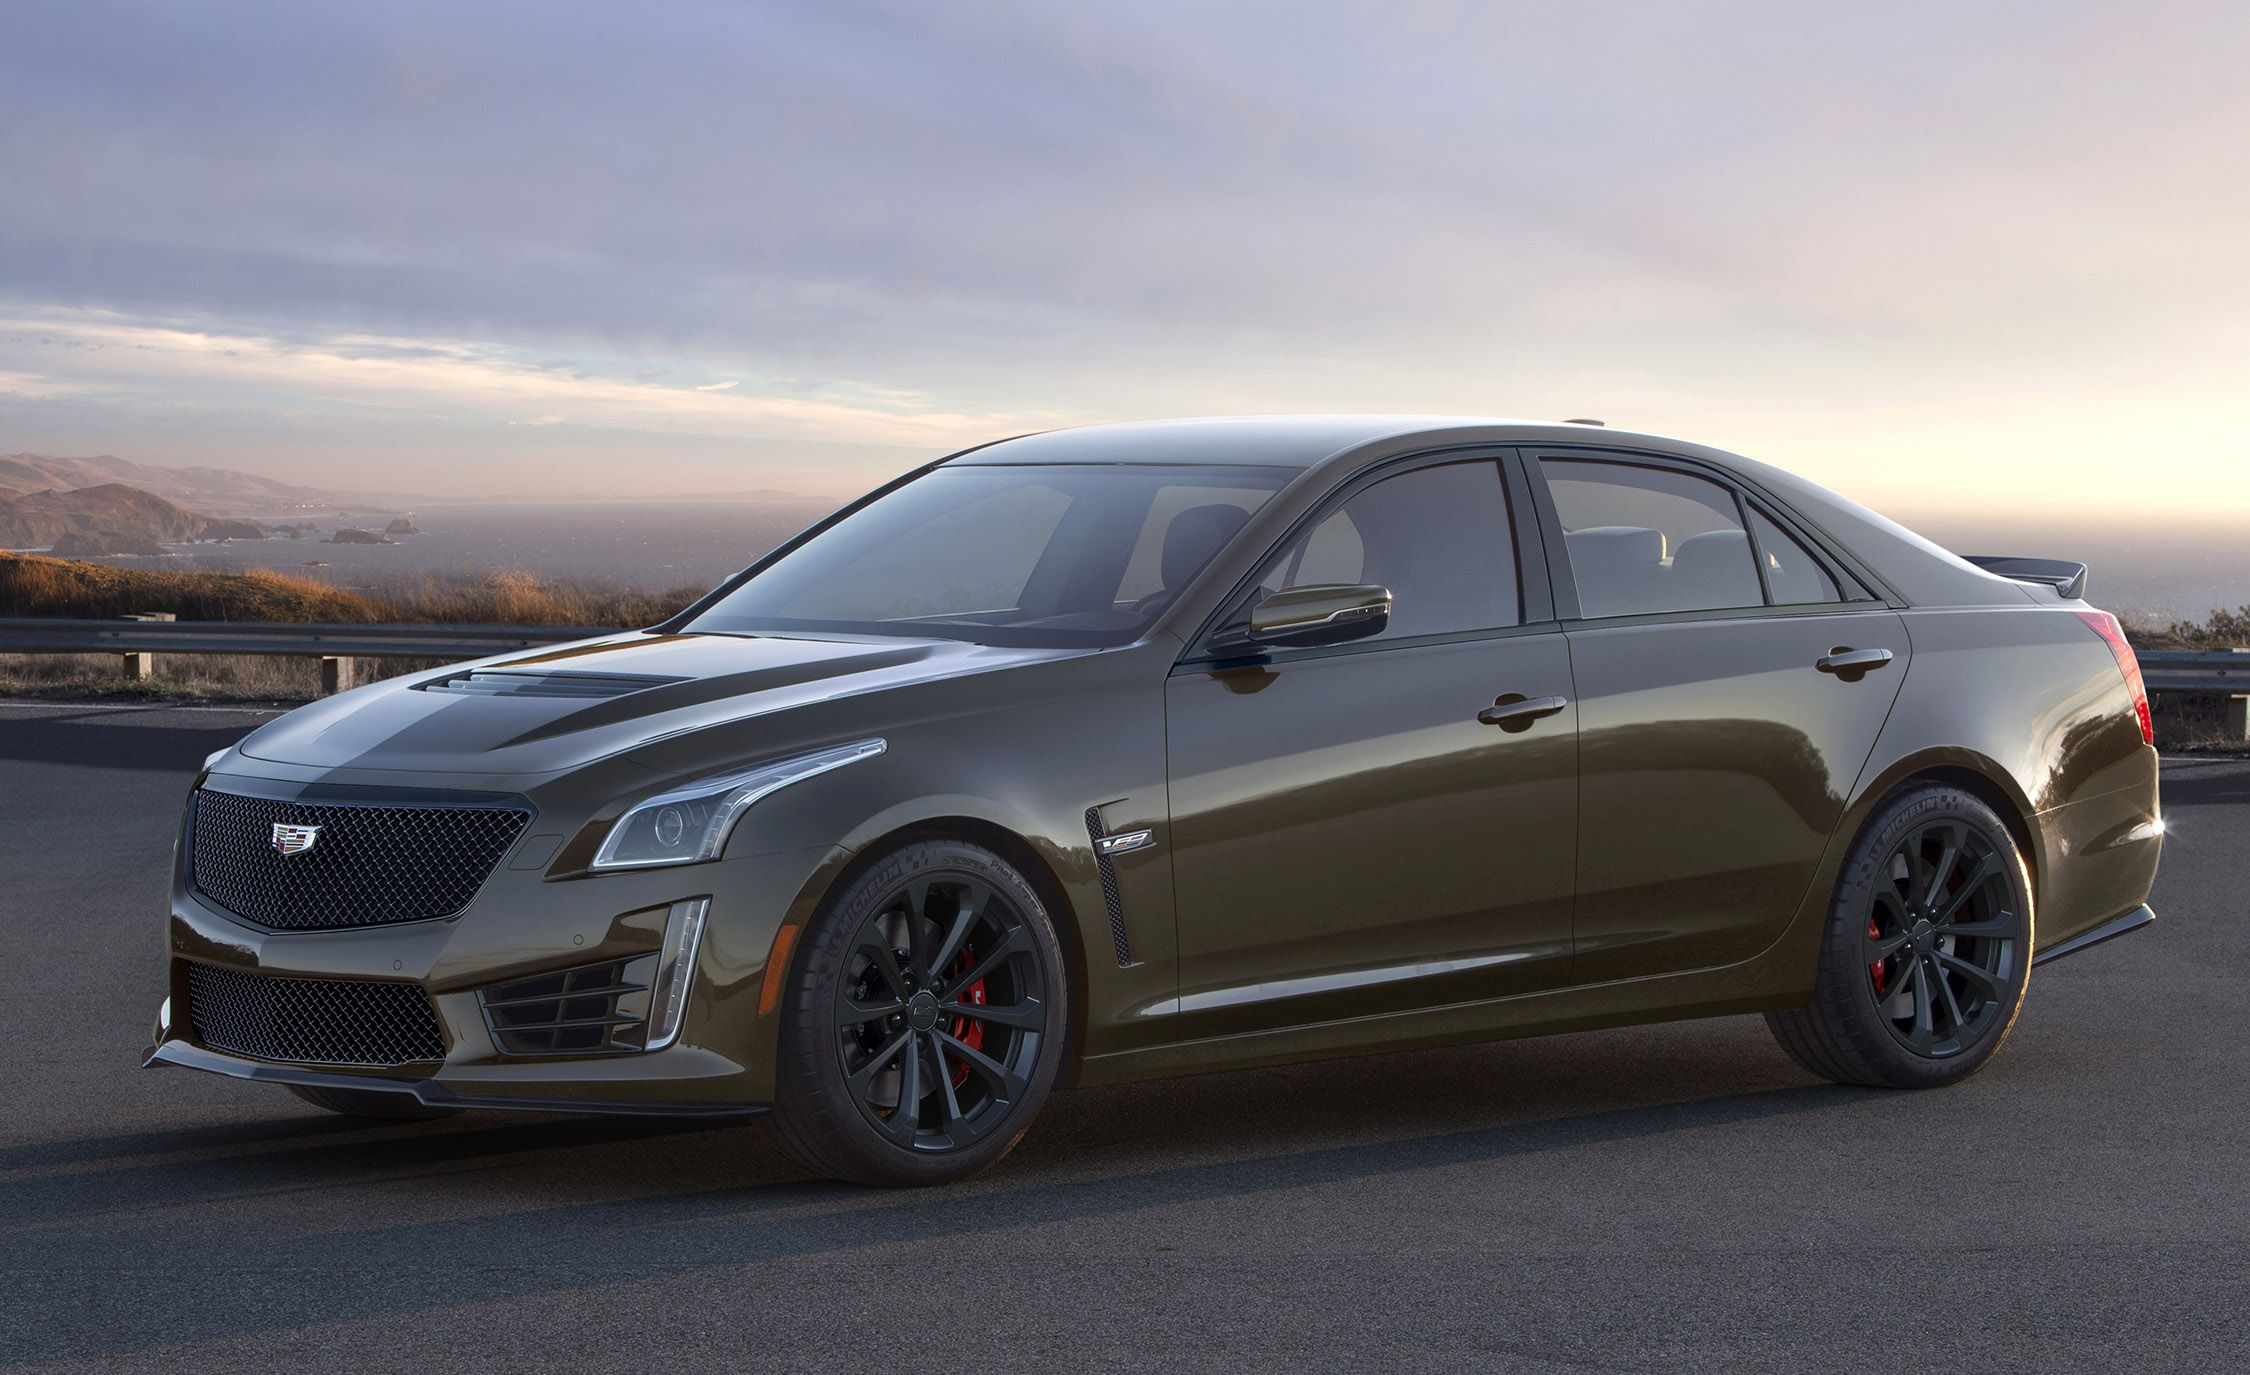 Cadillac Celebrates 15 Years of VSeries with ATSV and CTSV Pedestal